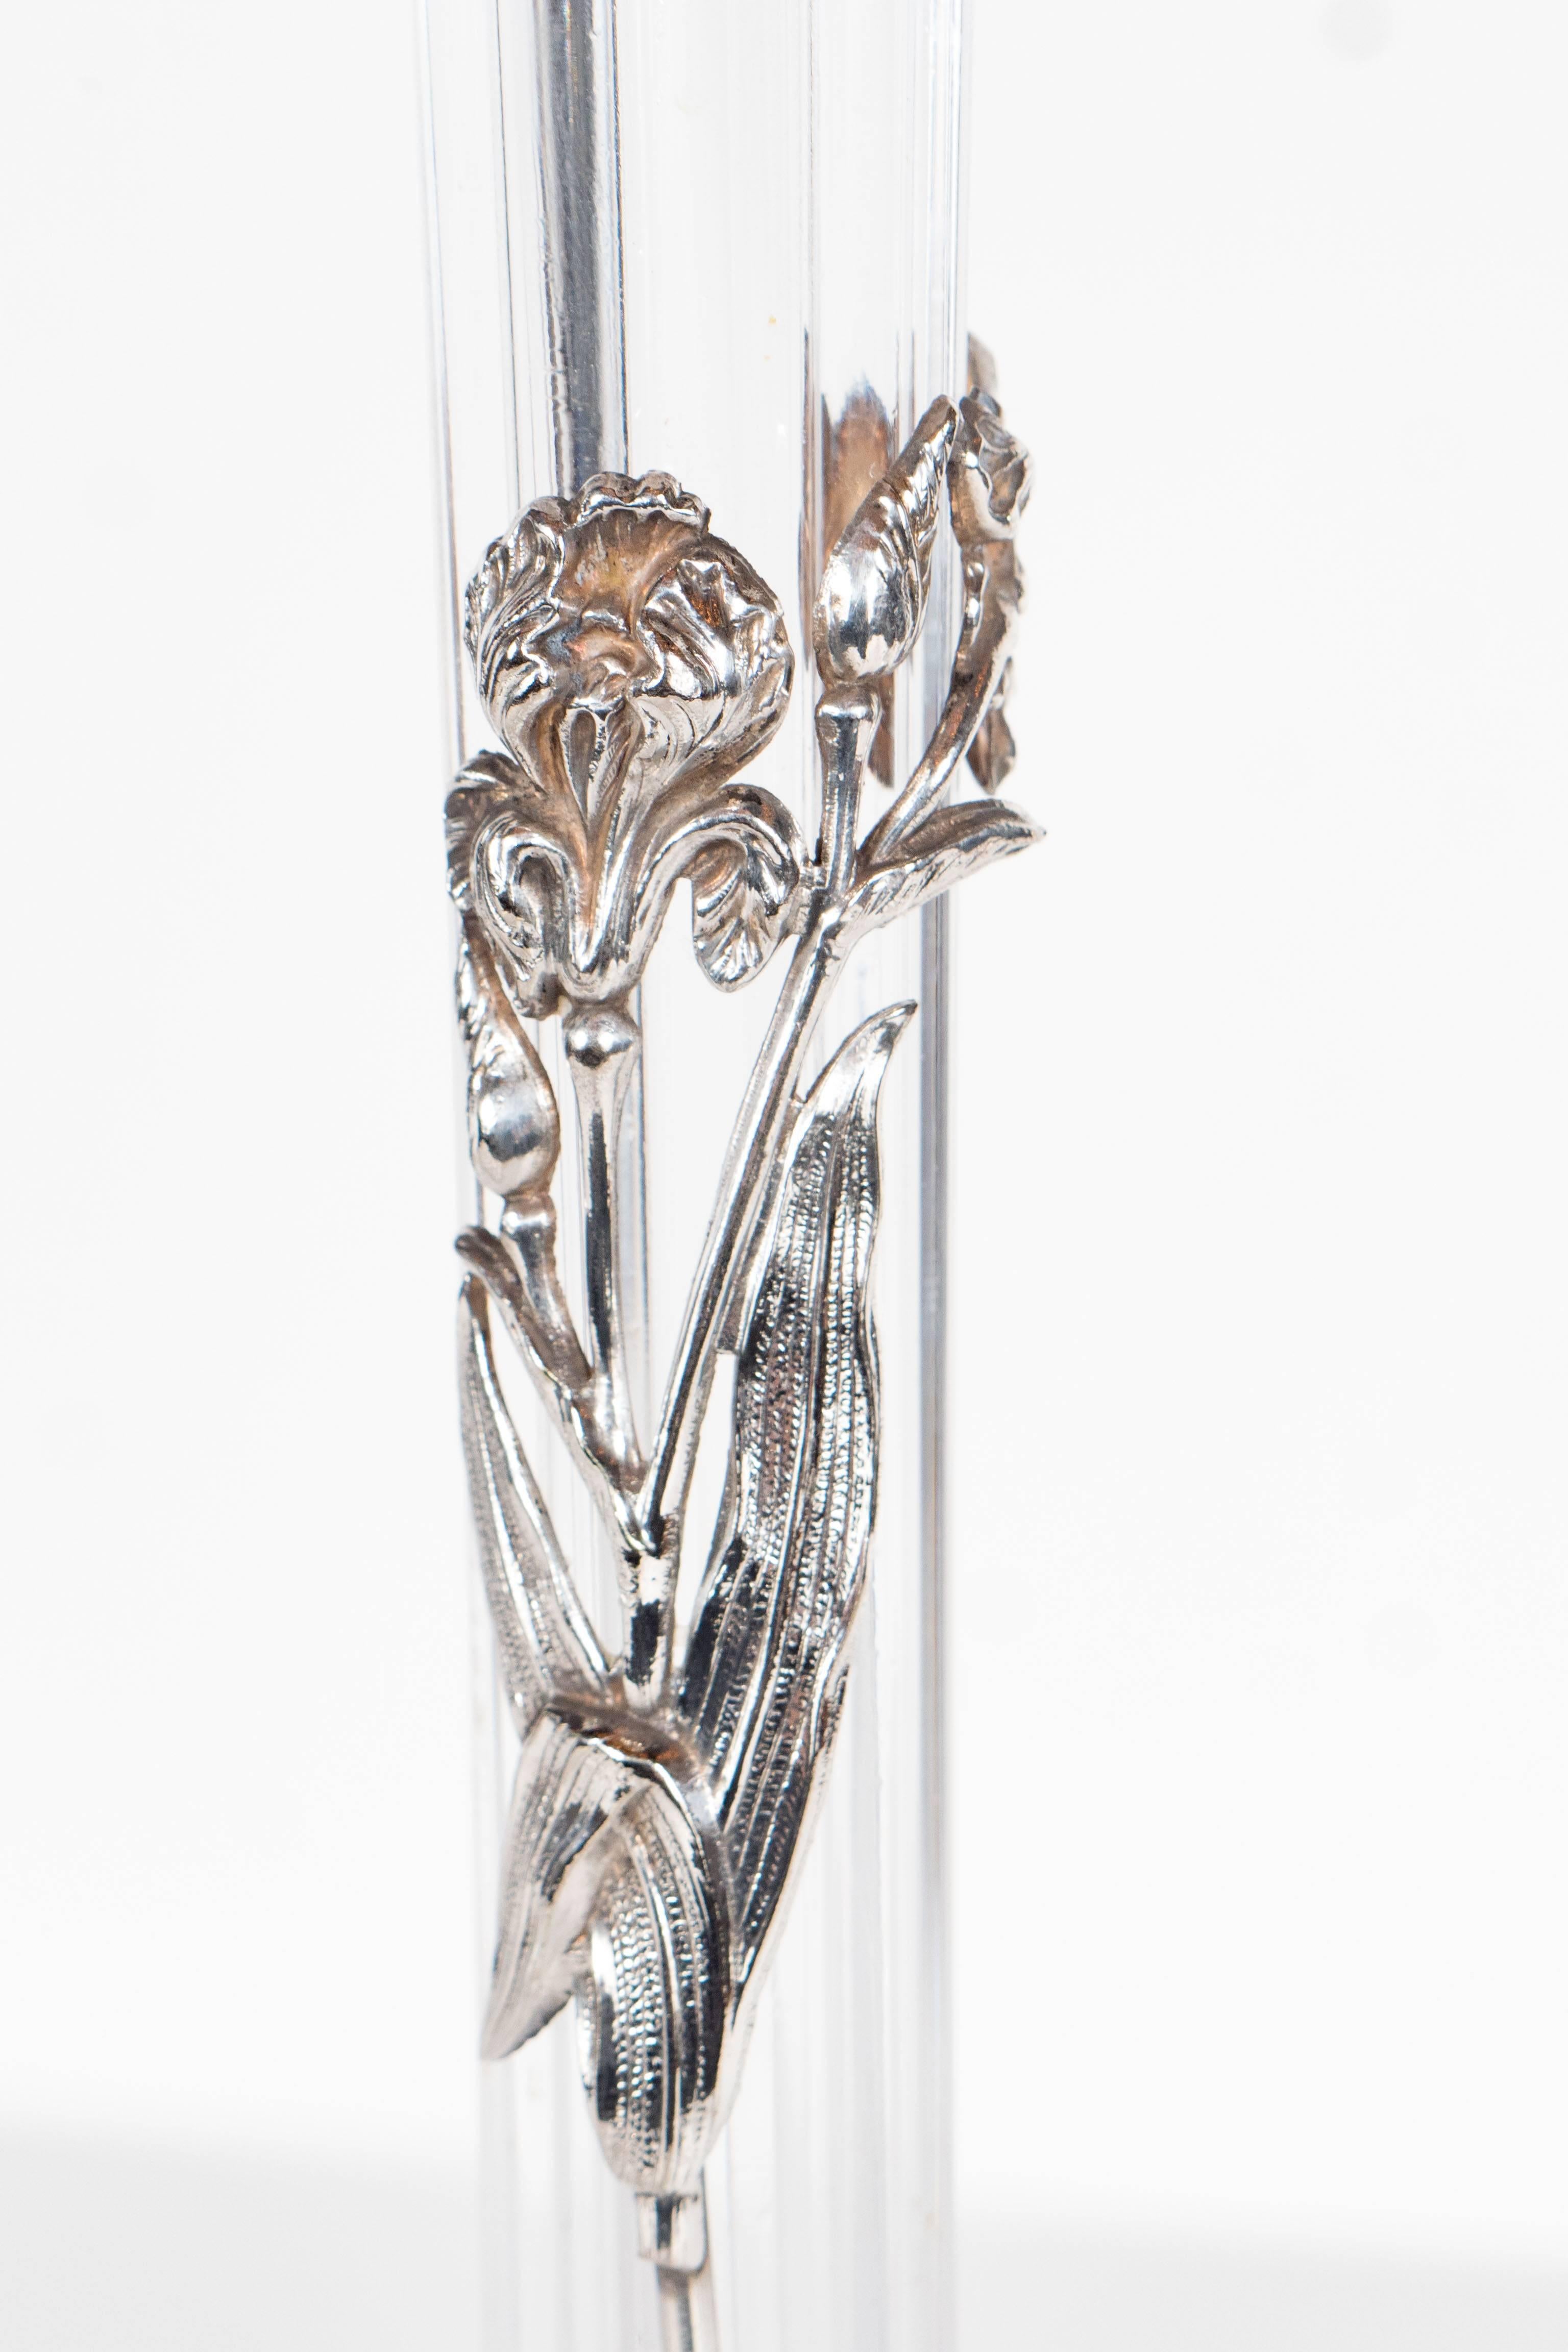 Early 20th Century Art Nouveau Glass Bud Vase with Sterling Mount of Scrolling Day Lily